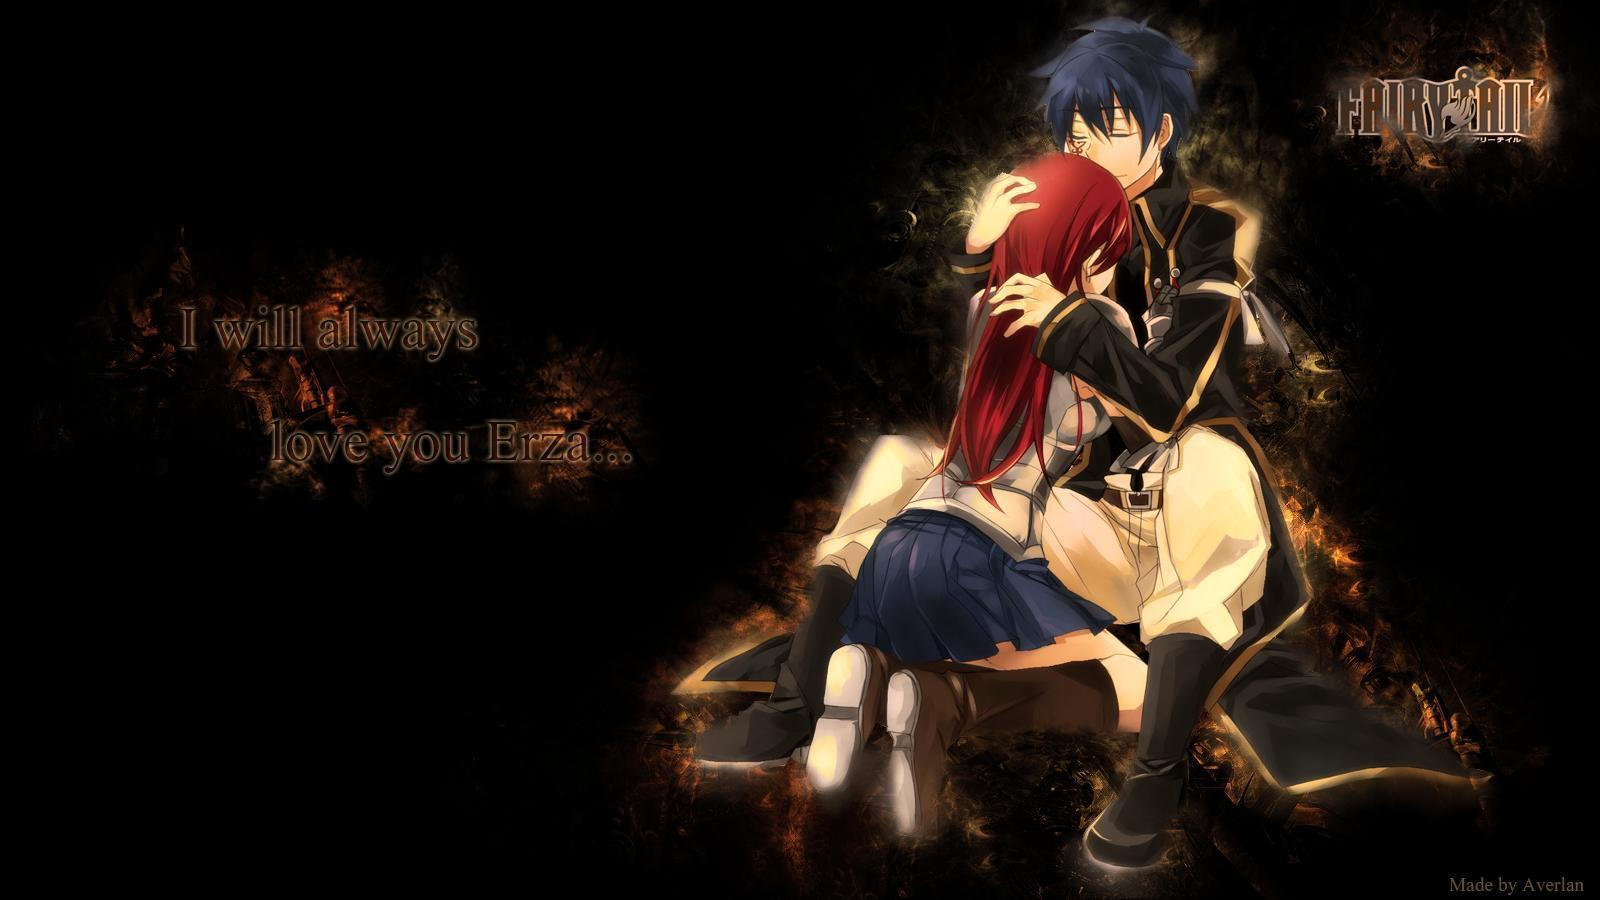 Fairy Tail Wallpapers by Averlan